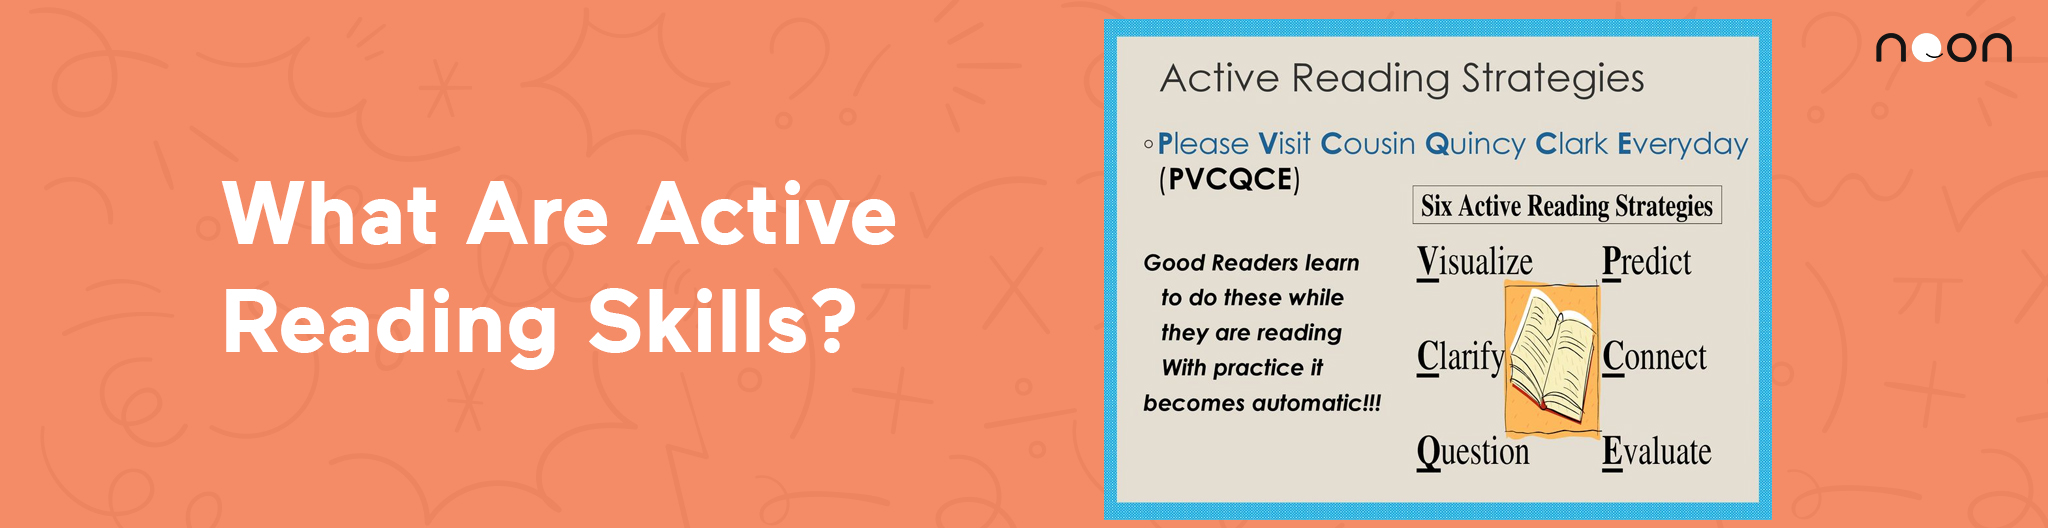 What Are Active Reading Skills?